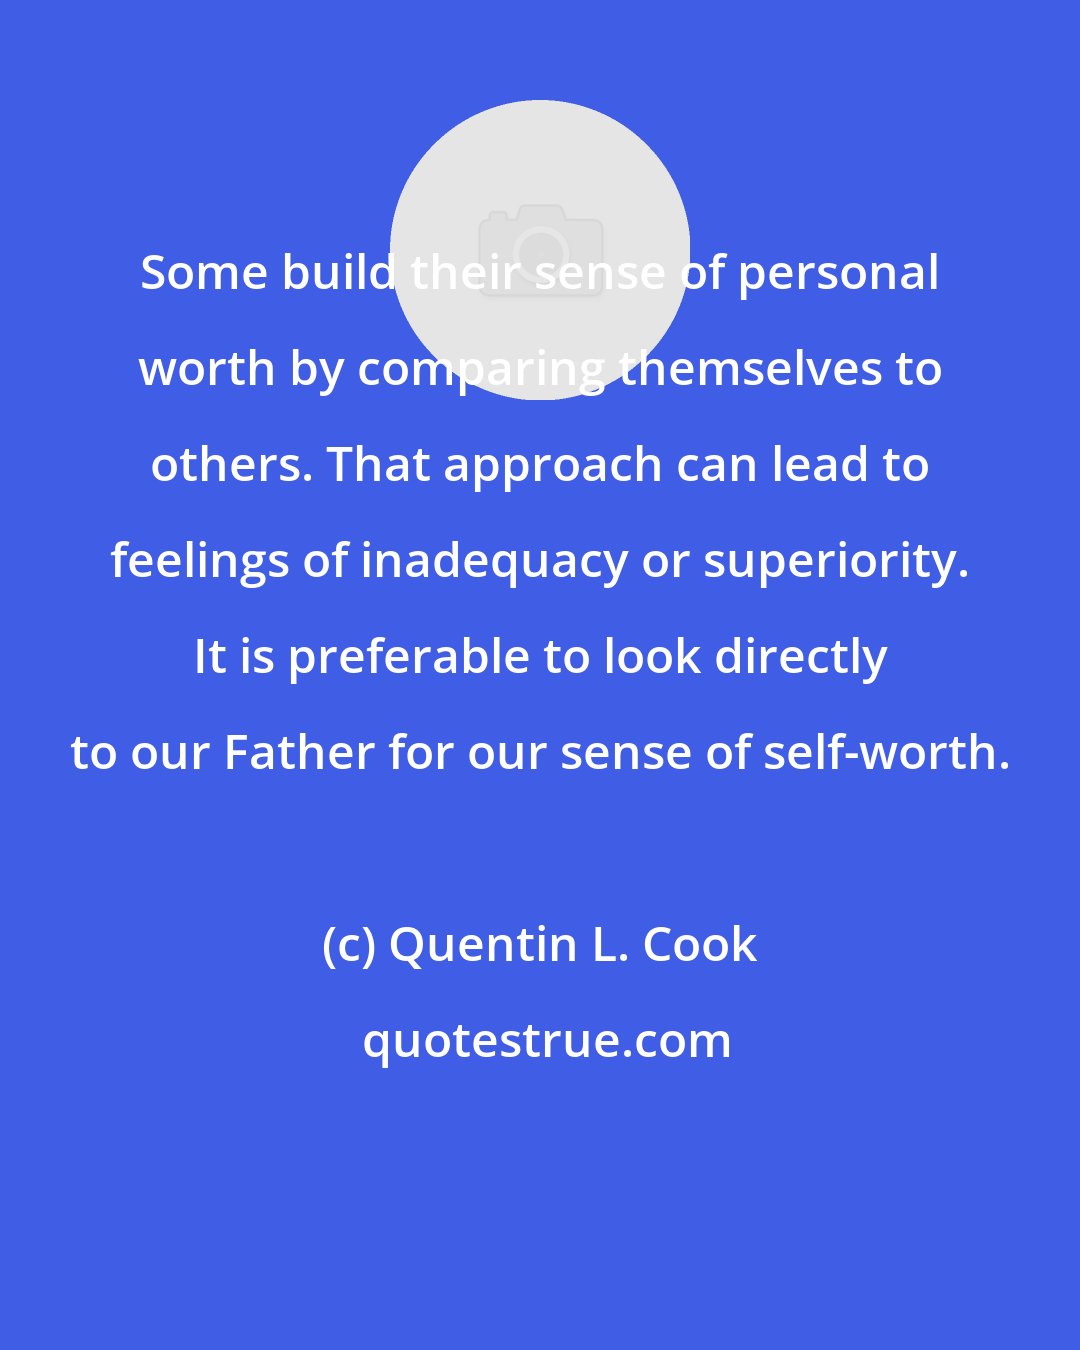 Quentin L. Cook: Some build their sense of personal worth by comparing themselves to others. That approach can lead to feelings of inadequacy or superiority. It is preferable to look directly to our Father for our sense of self-worth.